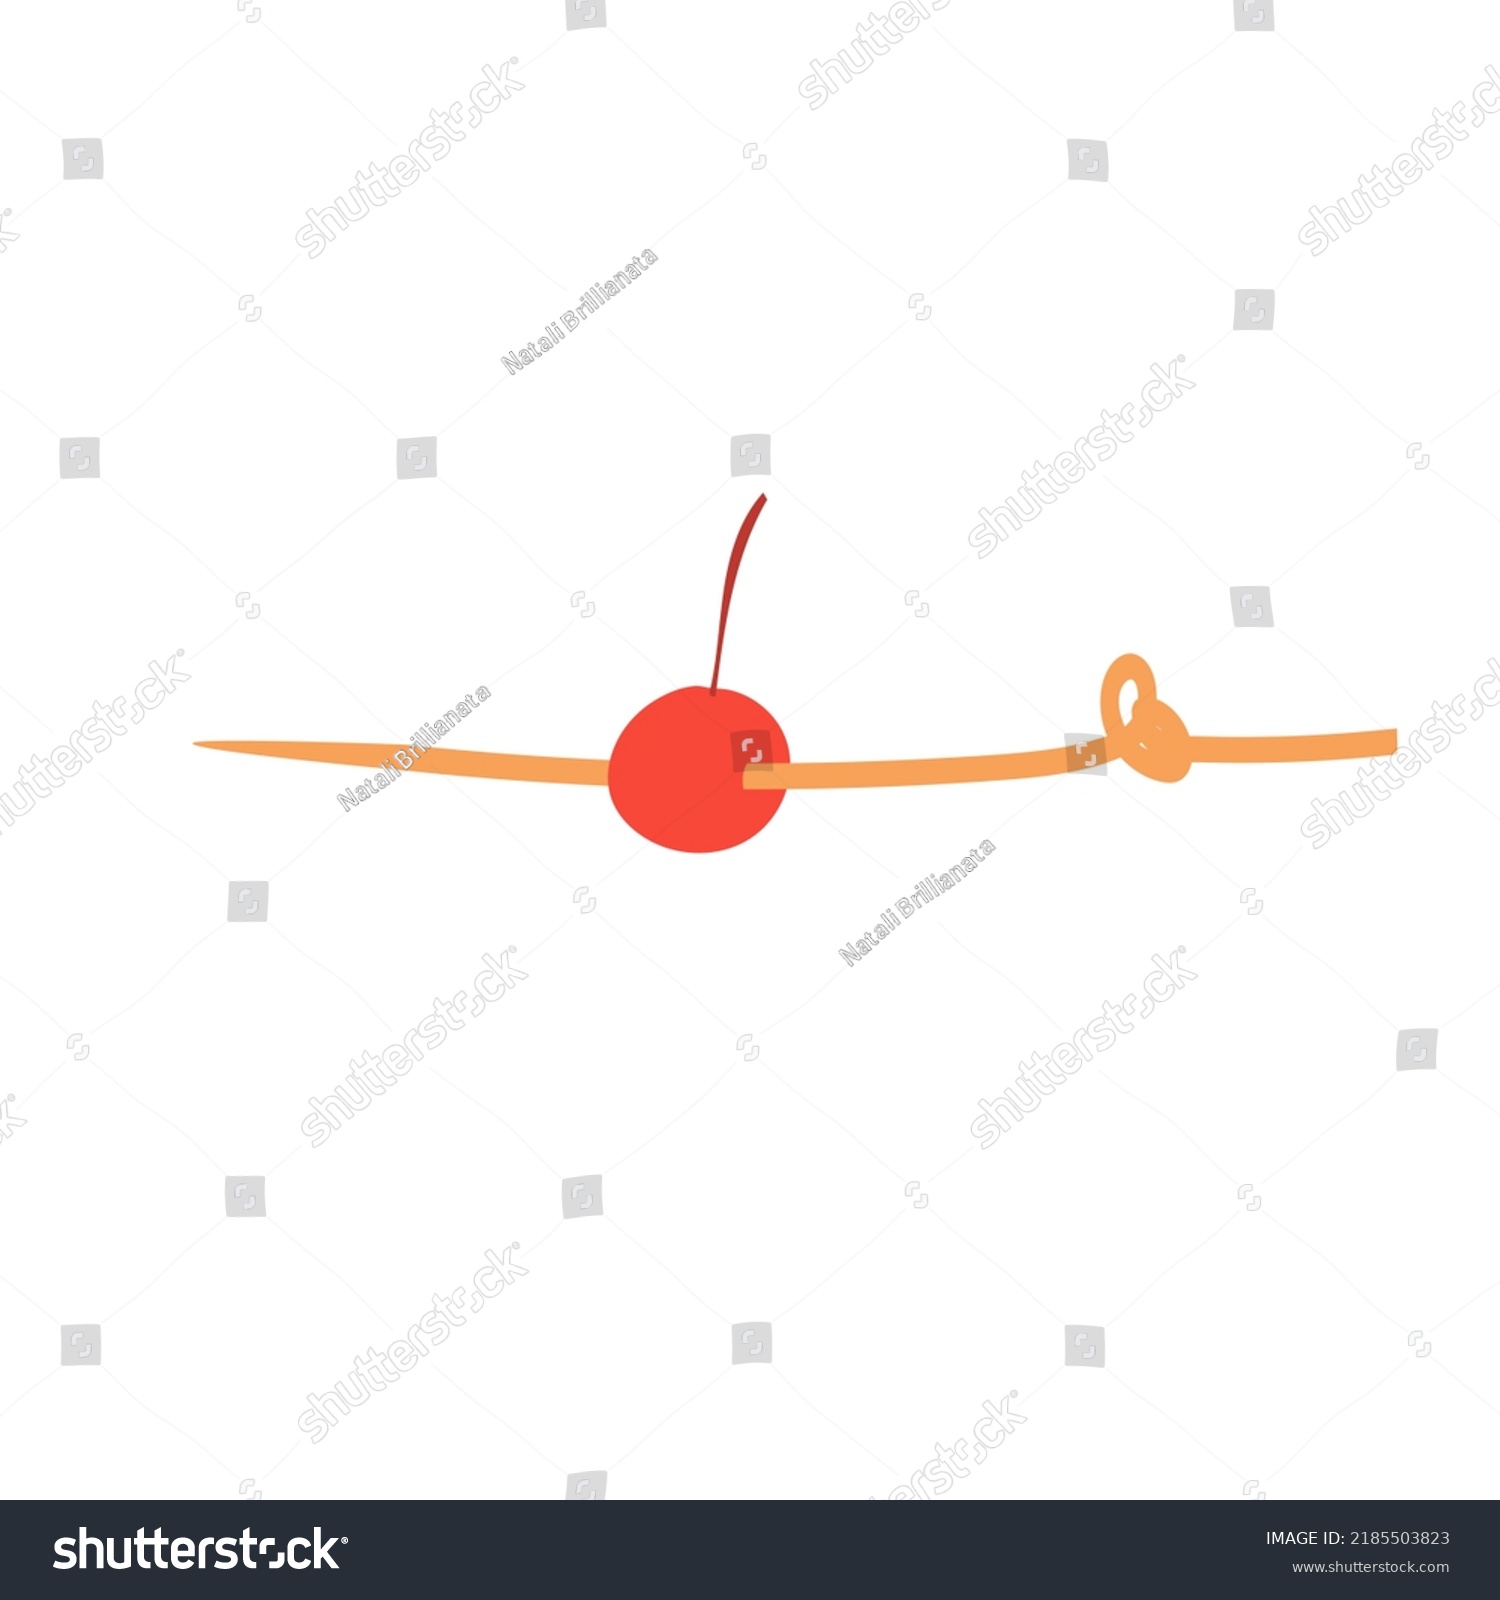 SVG of Cocktail skewer or cocktail stick isolated illustration. Sugar cherry on a skewer icon on white svg